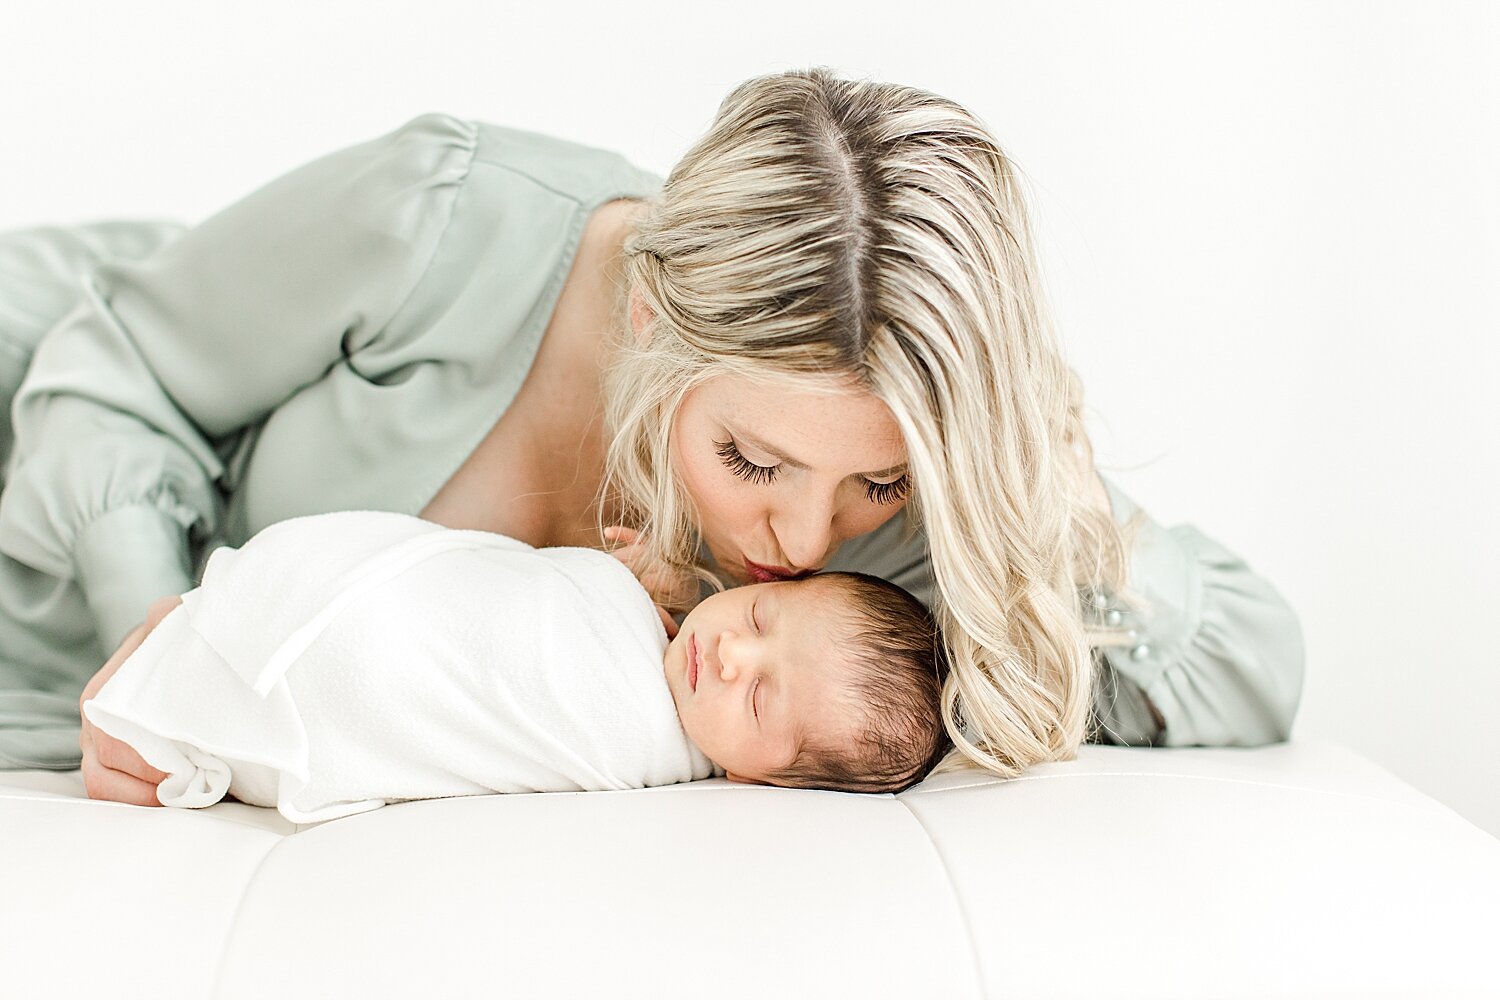 Newborn photos of mom and her son. Photo by CT Newborn Photographer, Kristin Wood Photography.